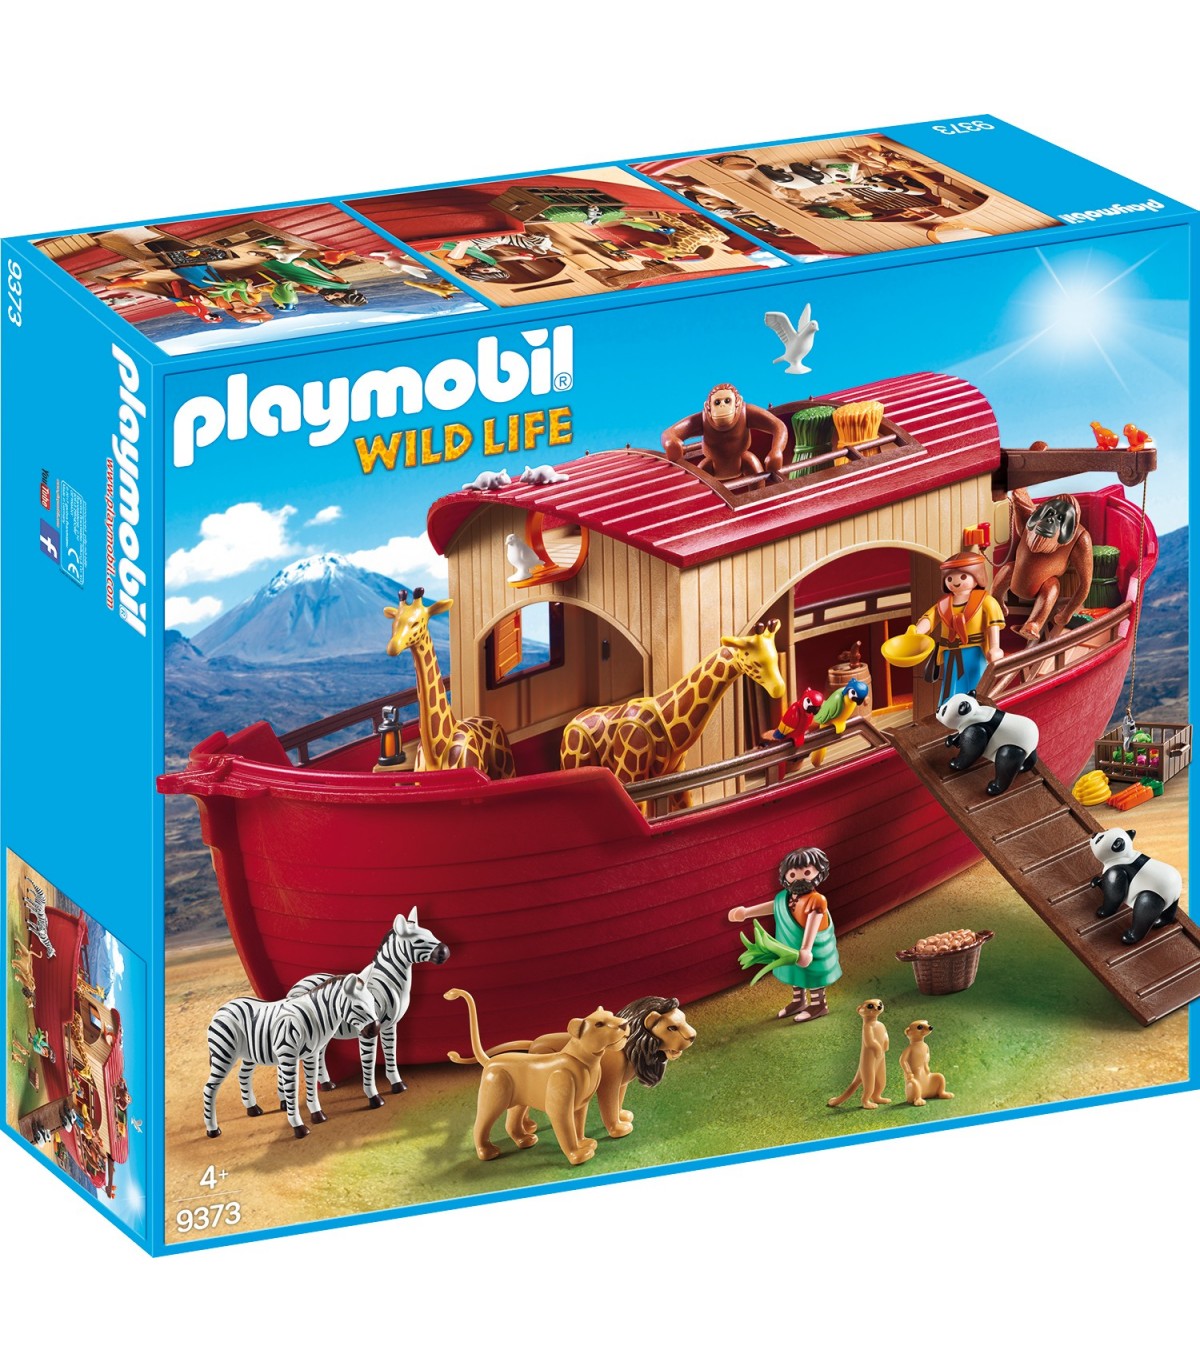 consumption aircraft solely Oferta Jucarie Playmobil - Arca Lui Noe - Pandy Toys ®